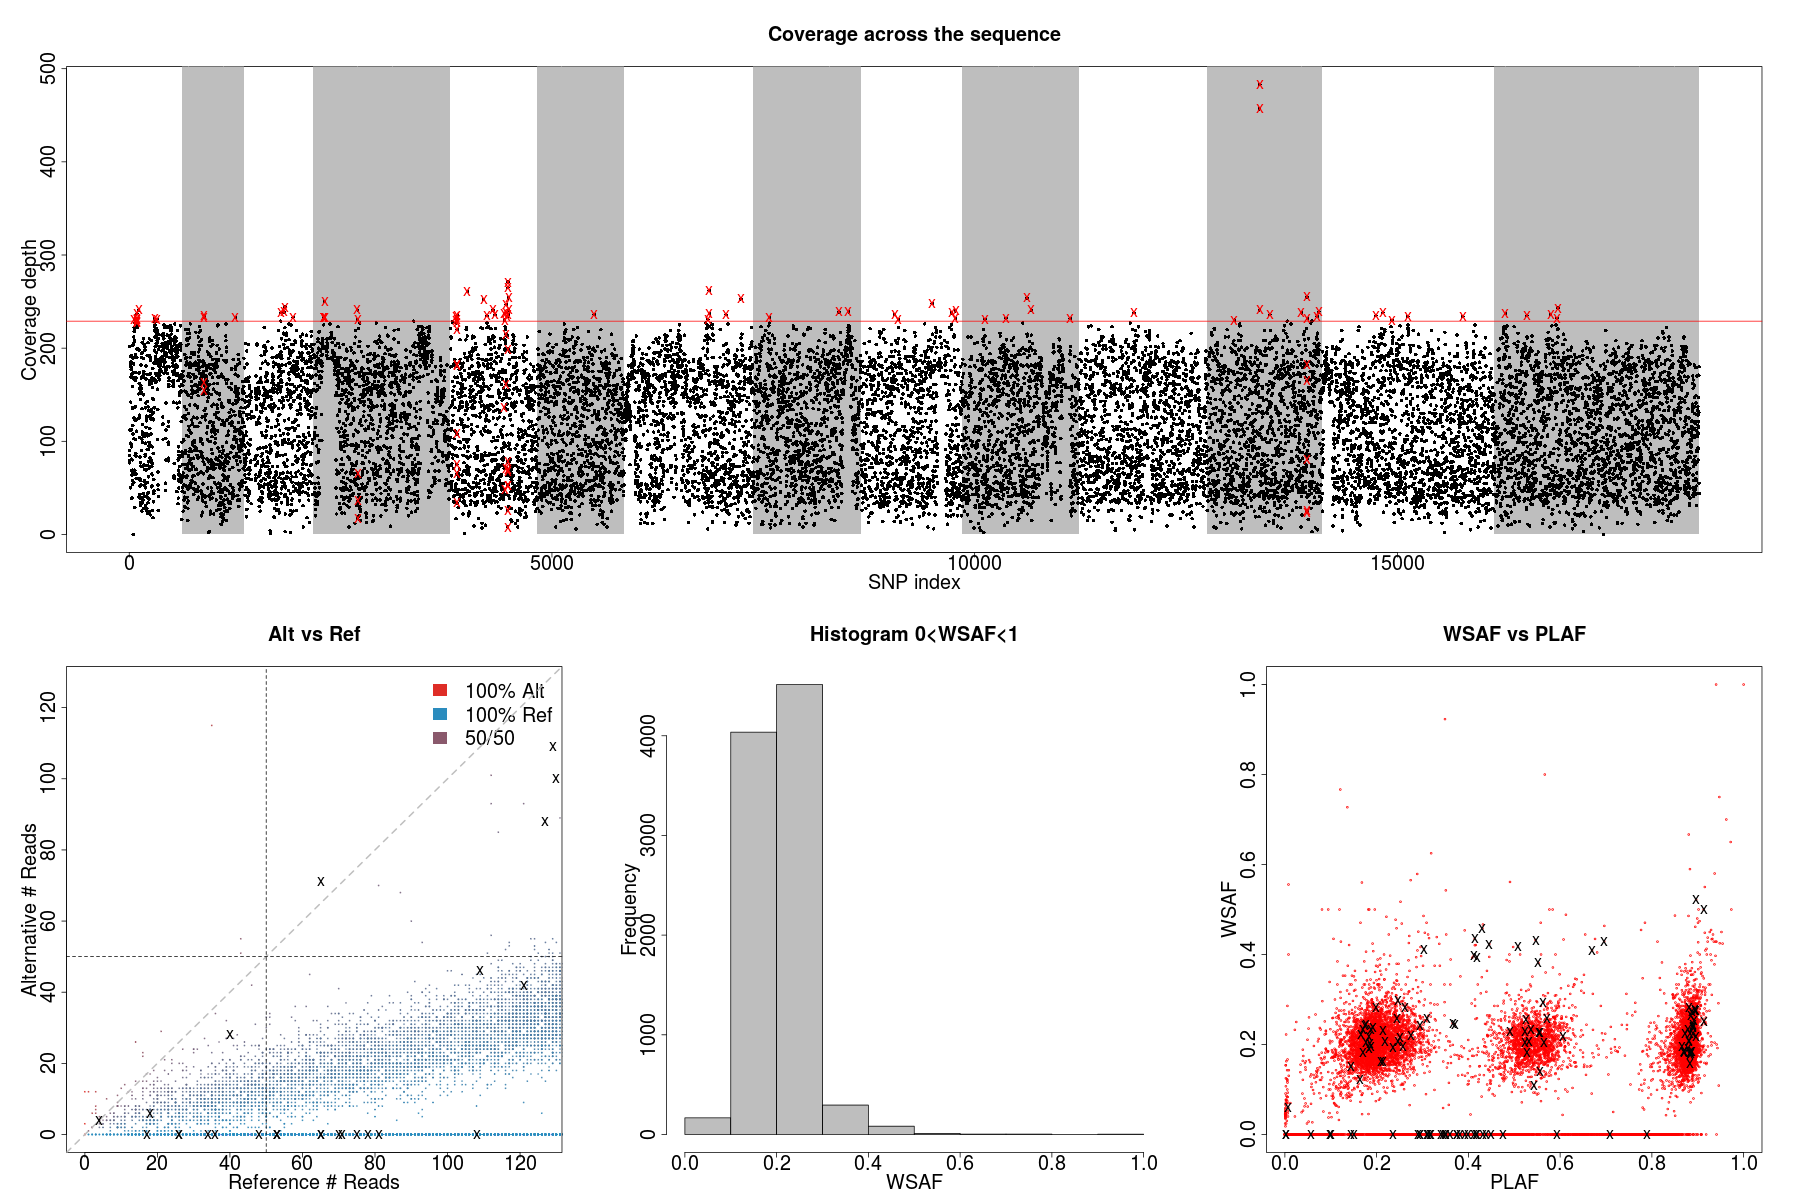 Plot alternative allele and reference allele counts to identify evidence of mixed infection in *Pf3k* sample PG0390-C.